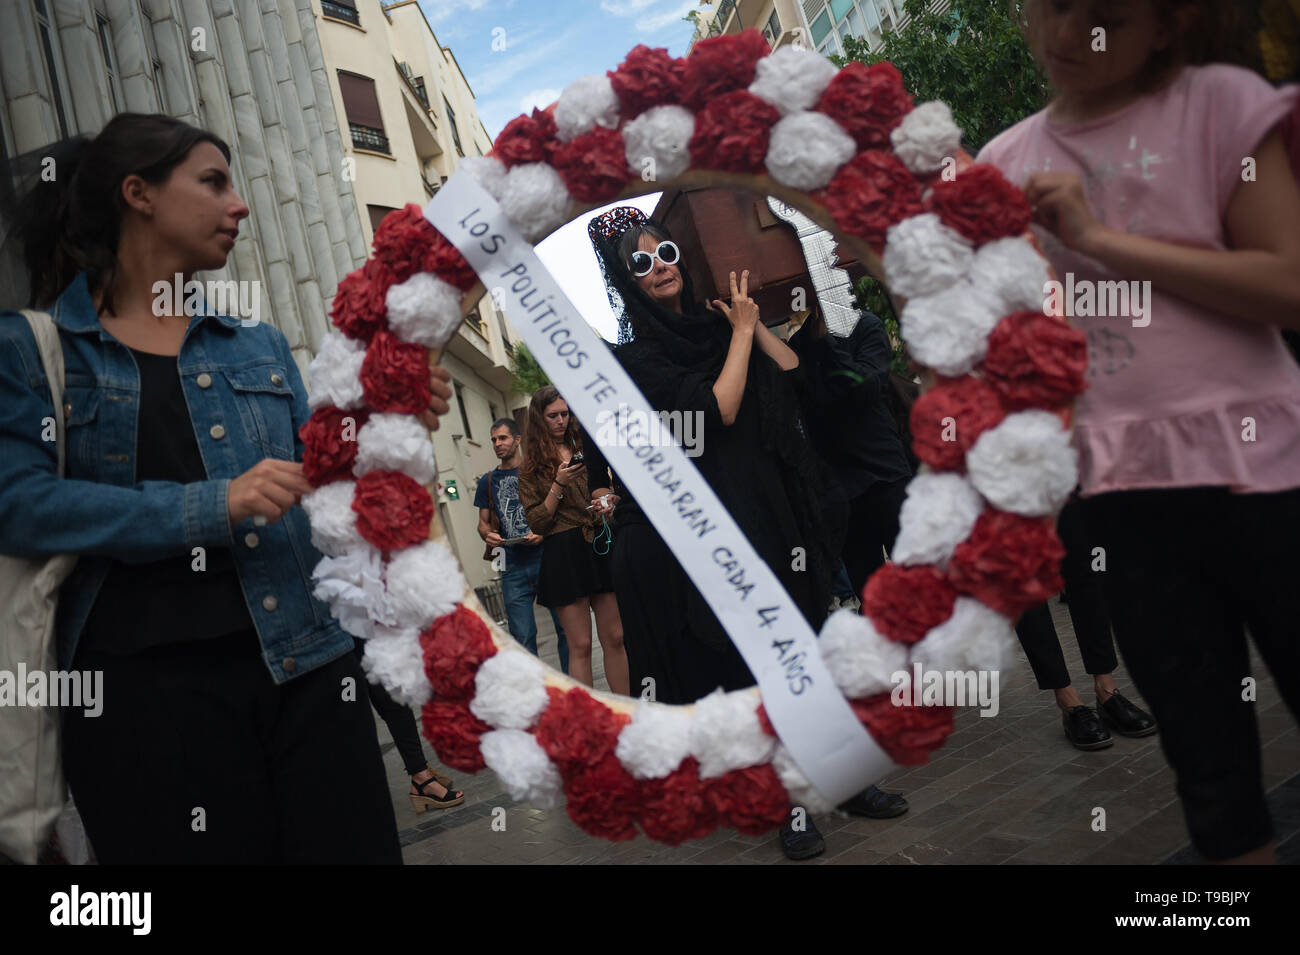 Demonstrators seen carrying flowers during the protest. The association of down town neighbours from Malaga have organized a symbolic funeral of a neighbour as part of a performance against the high cost of housing and rent because of property speculation in Malaga centre. Stock Photo